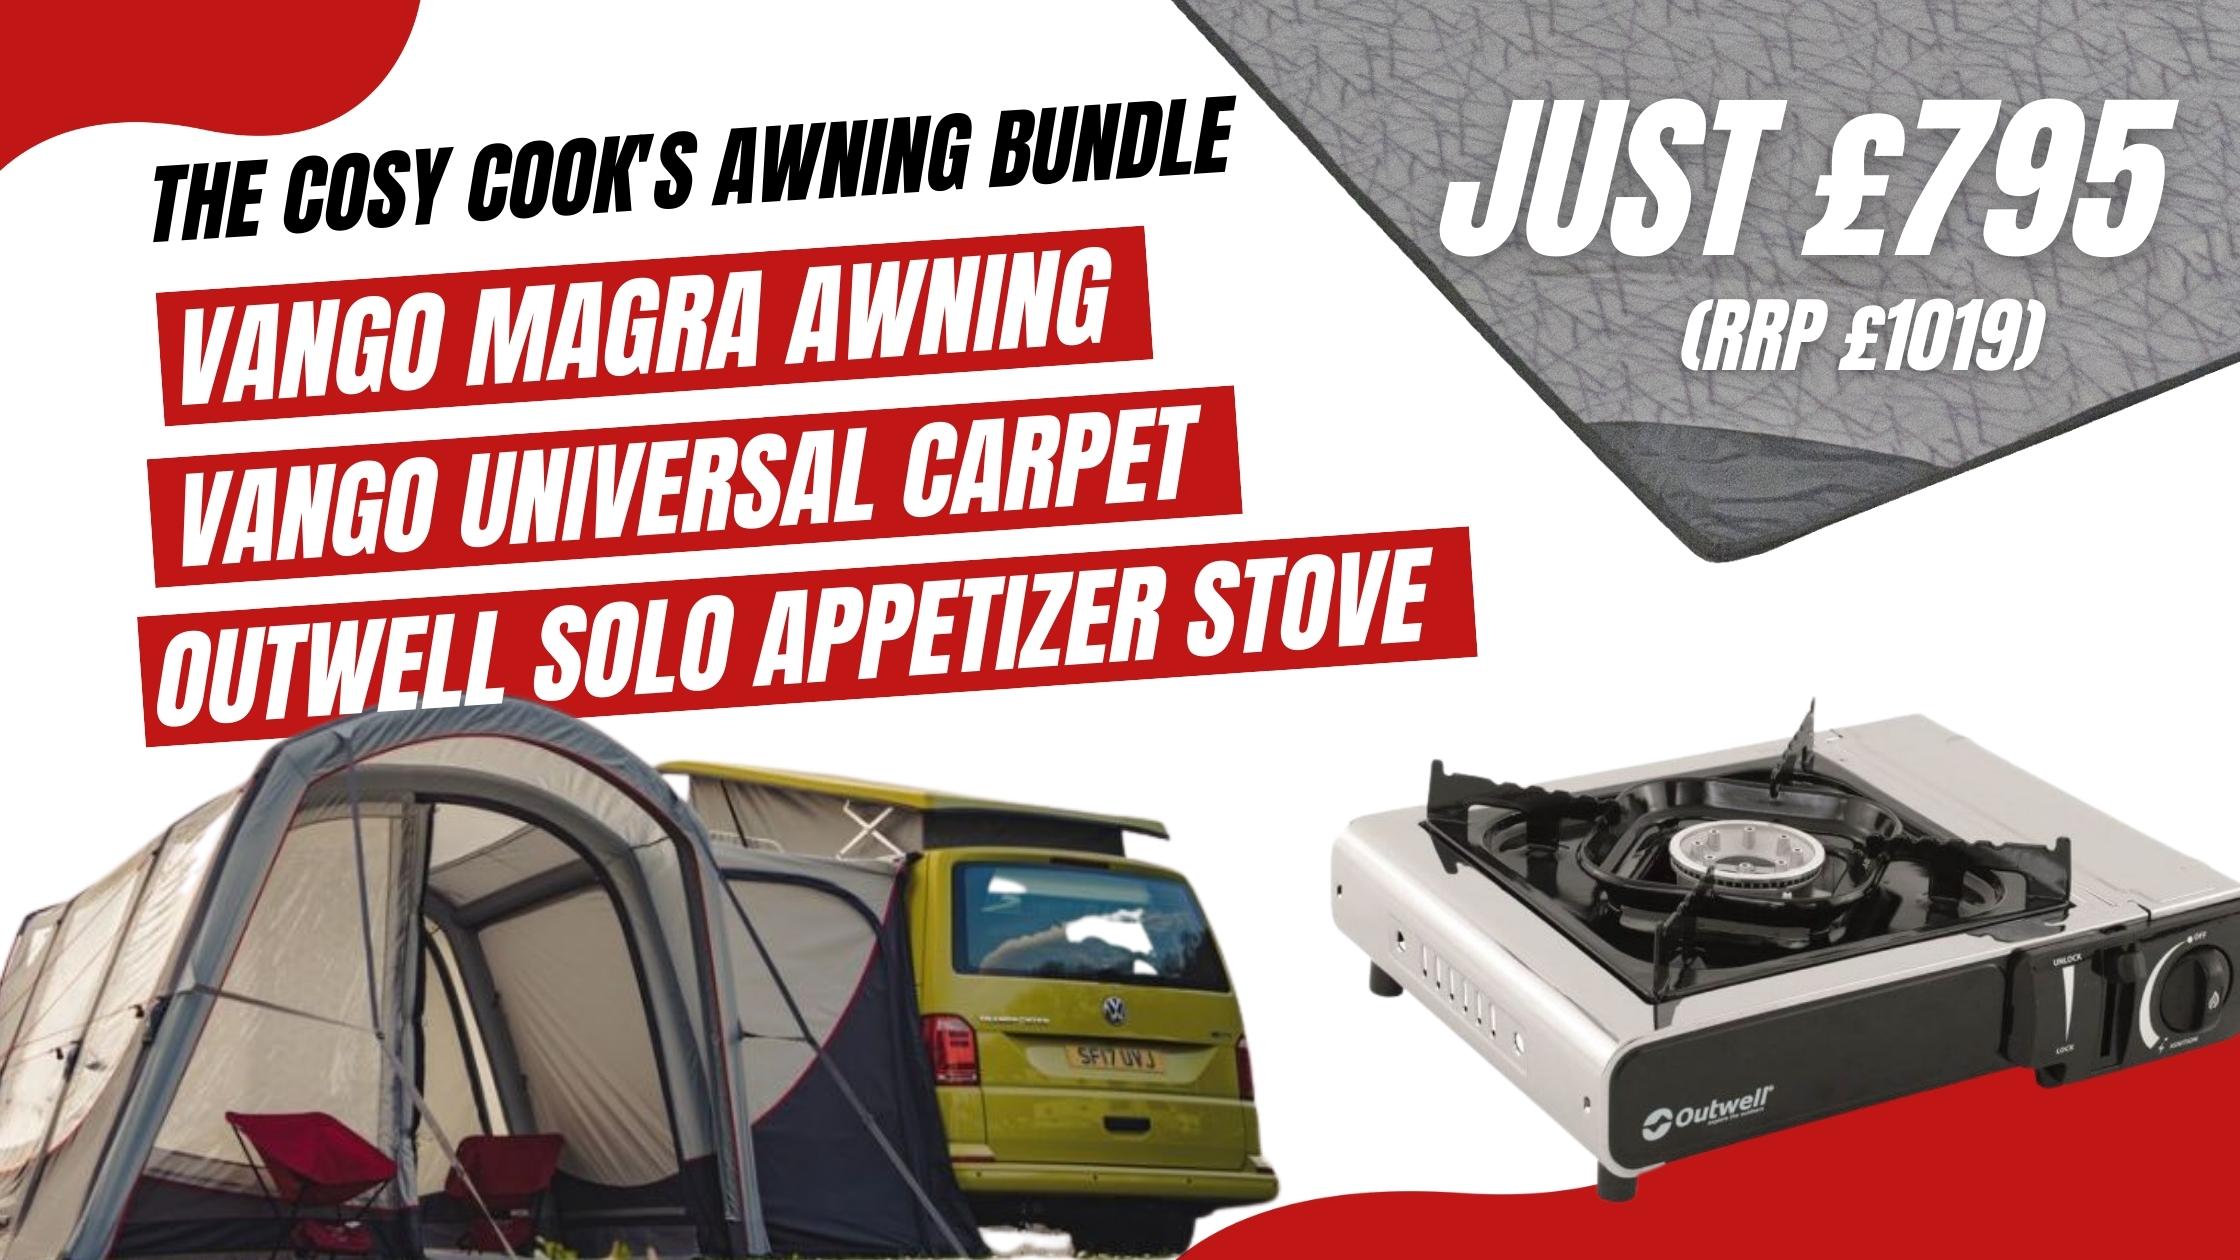 Save on awning bundles from CamperKing